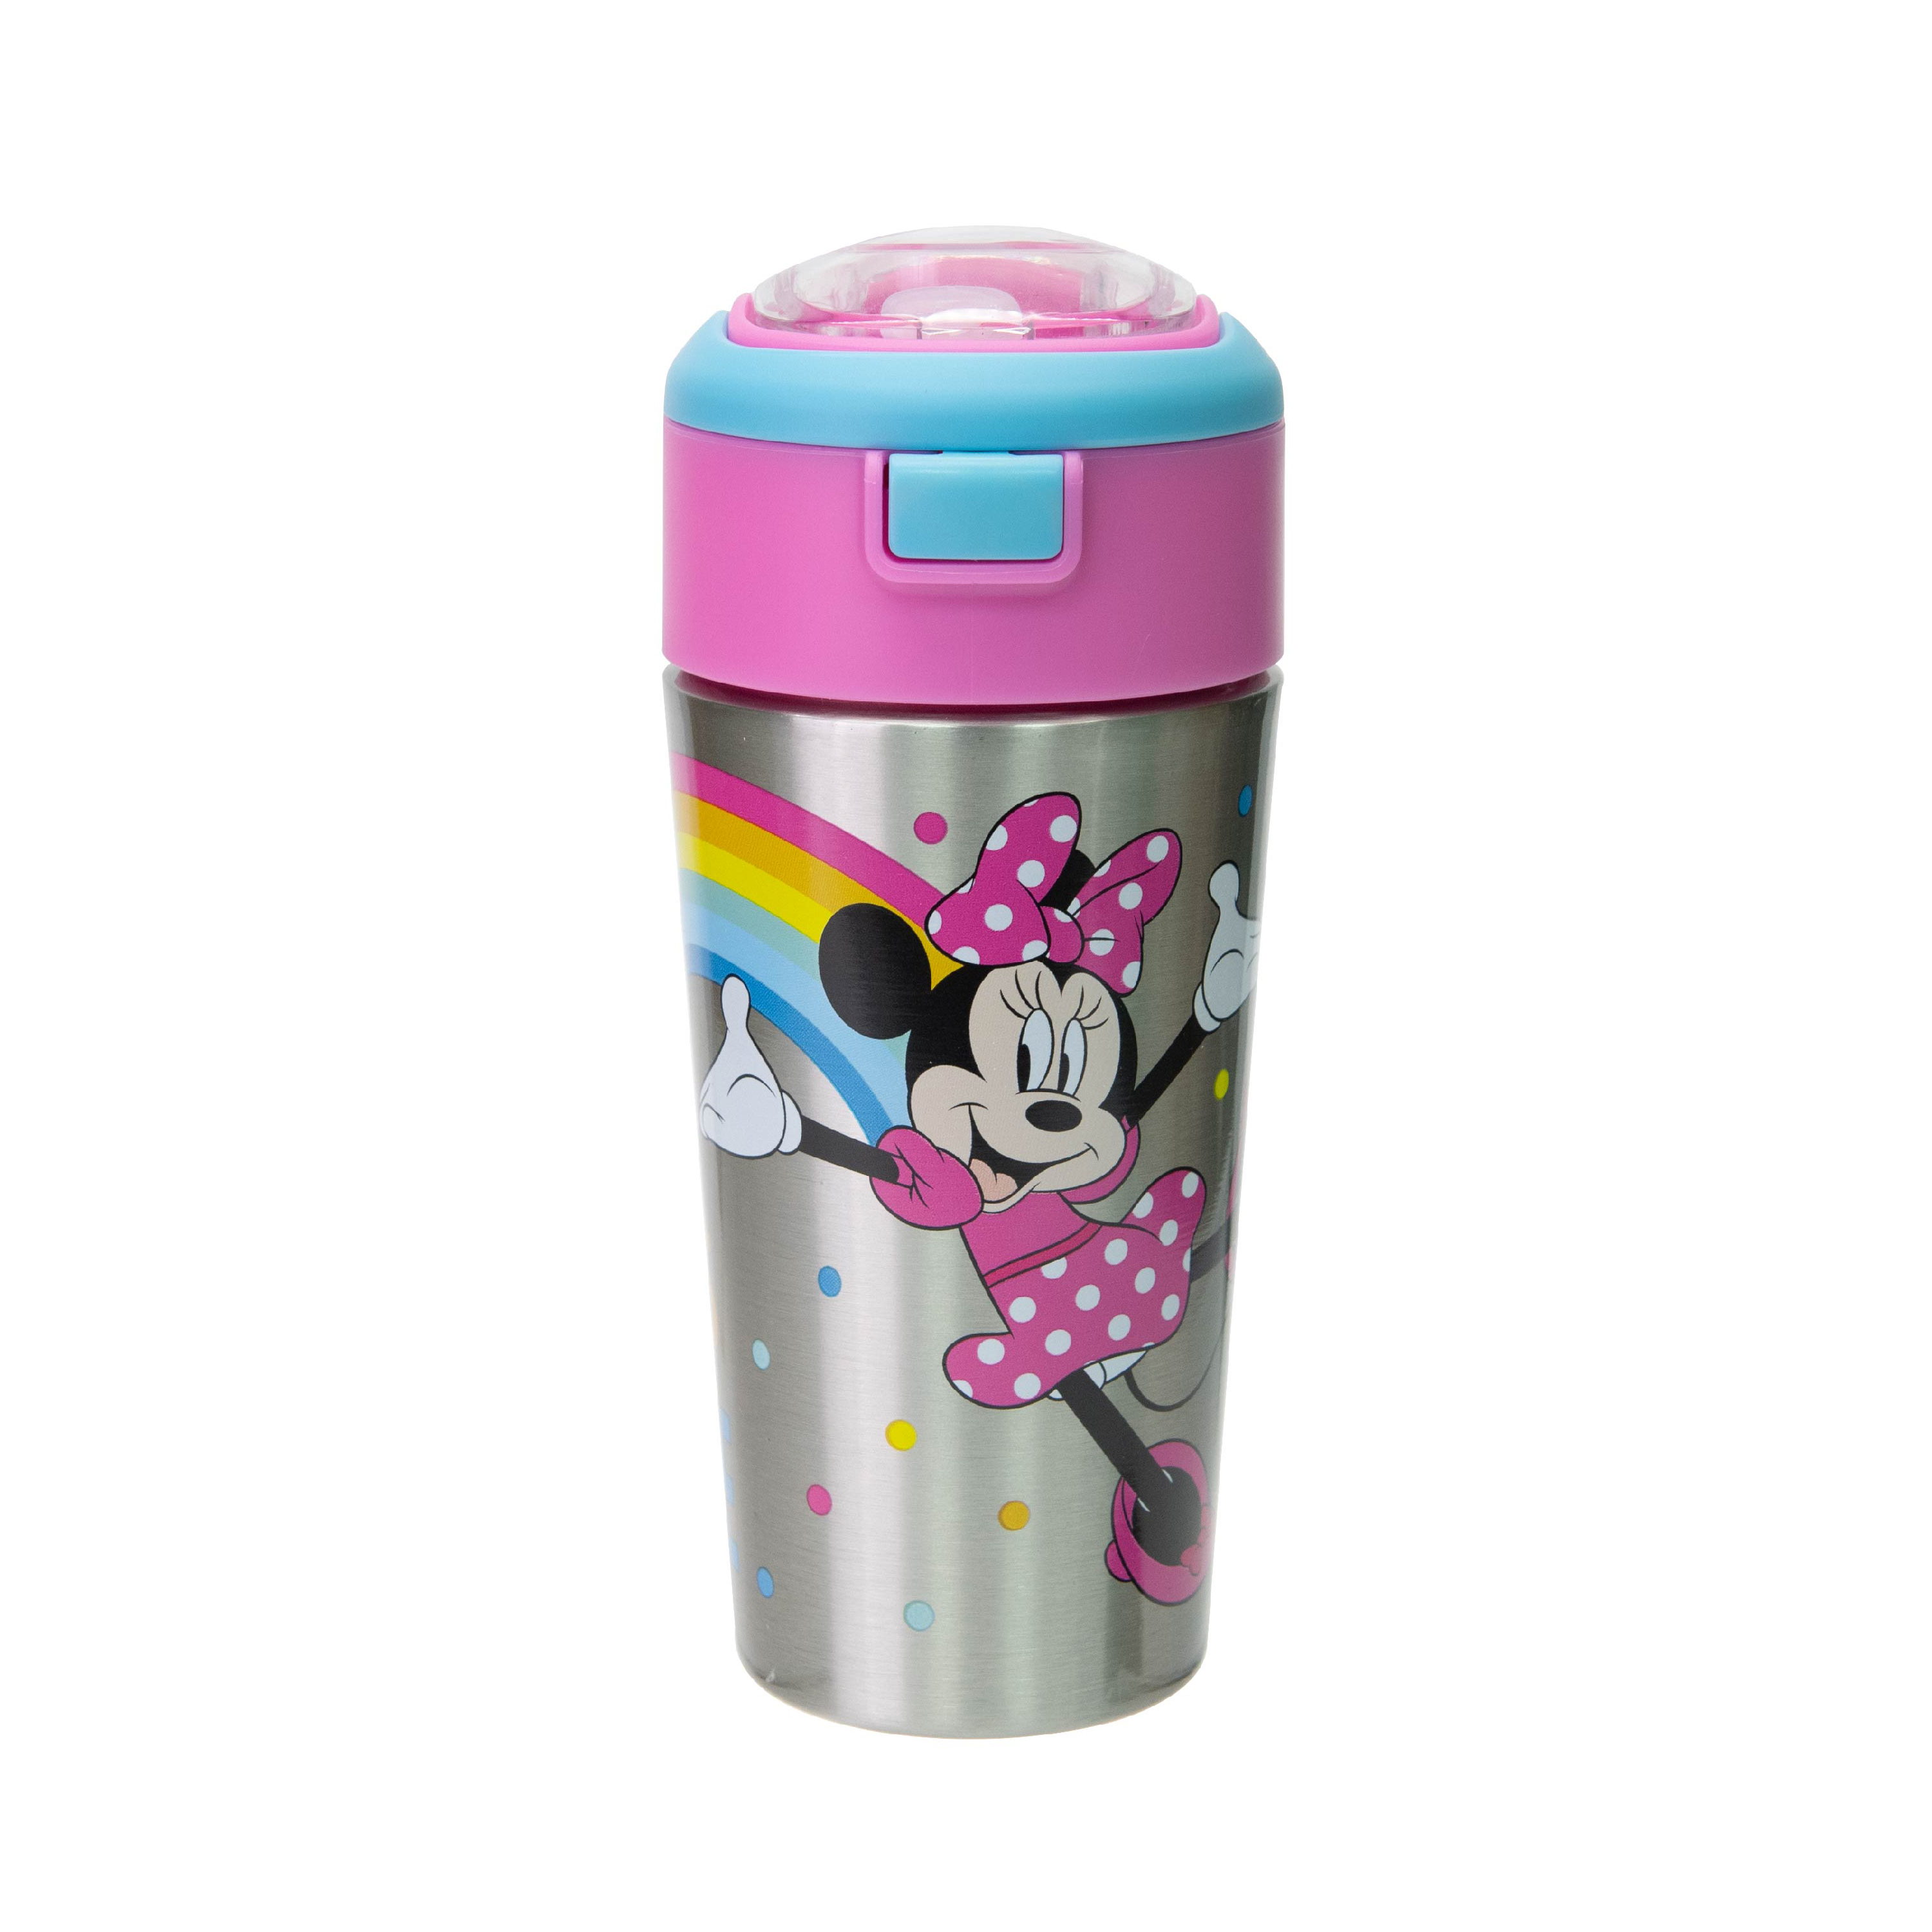 Disney 12 ounce Vacuum Insulated Reusable Stainless Steel Water Bottle, Minnie Mouse slideshow image 1